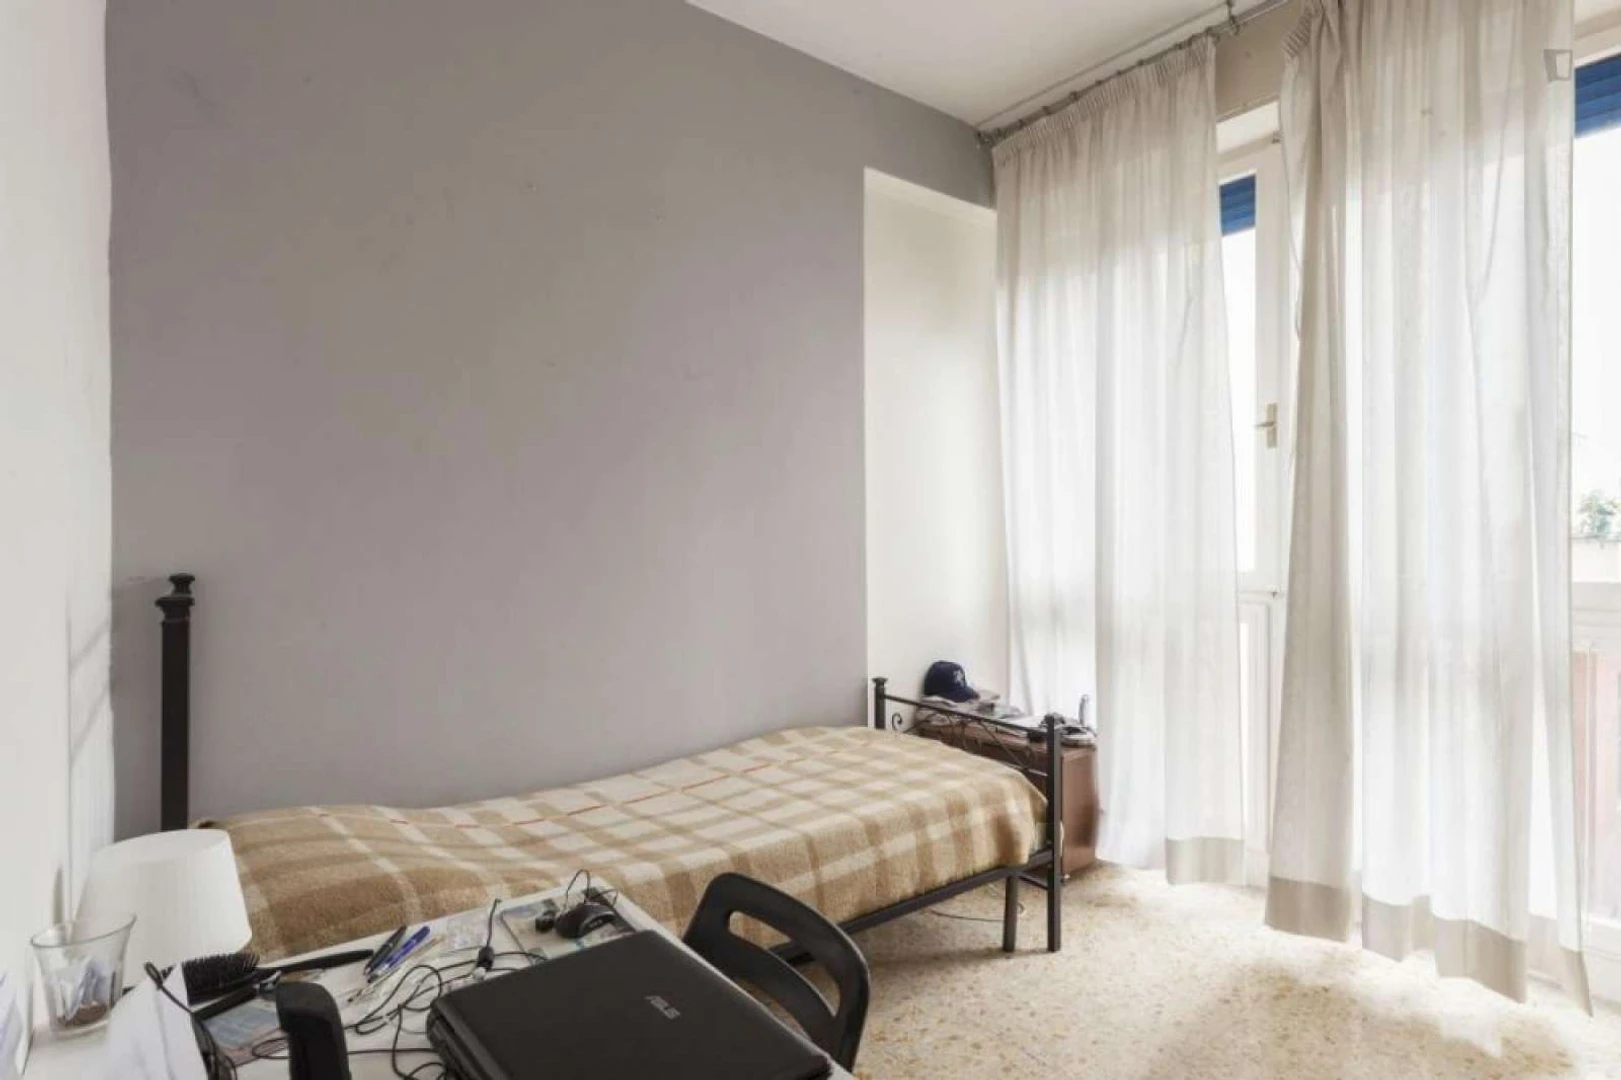 Renting rooms by the month in firenze